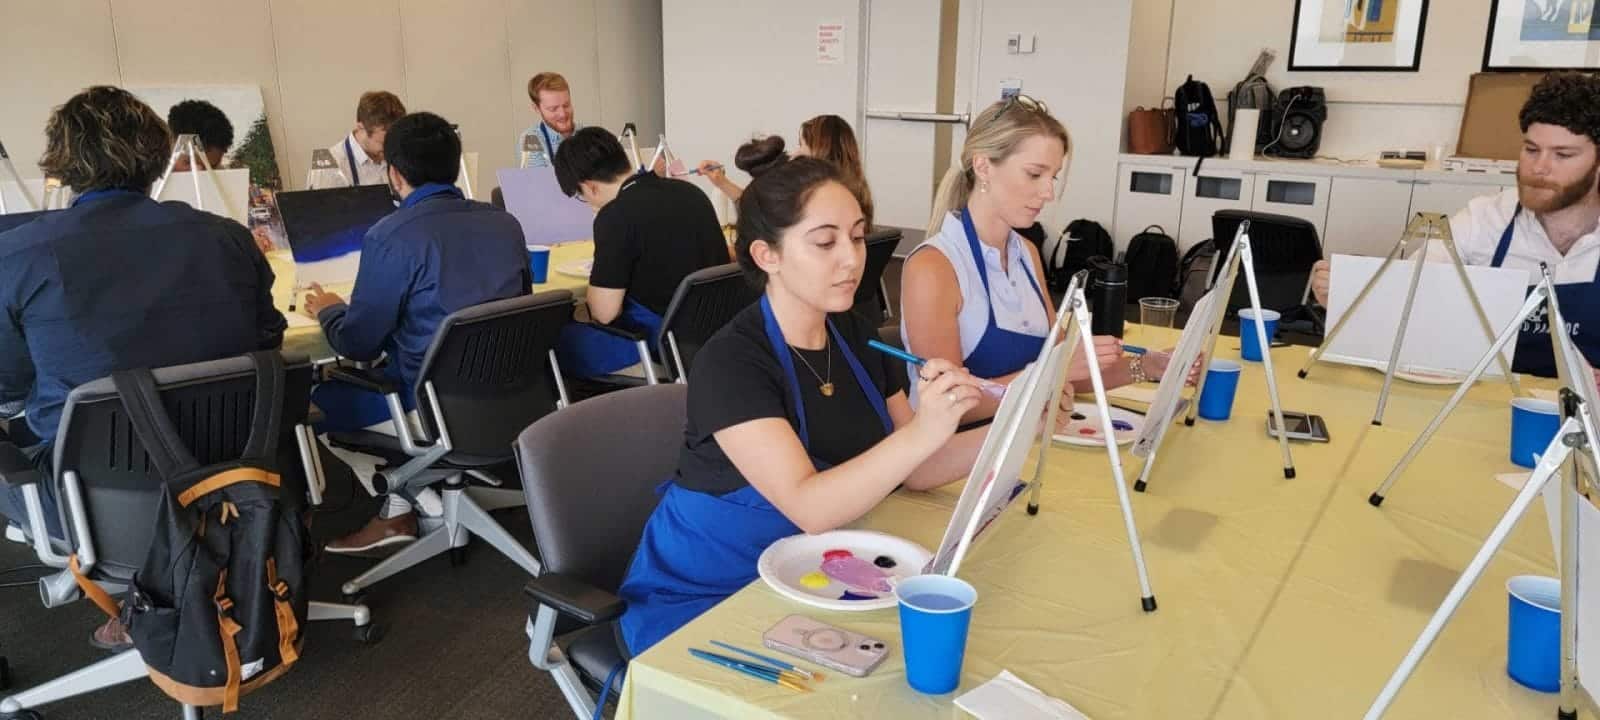 A group of people engaging in a sip and paint activity at an office.